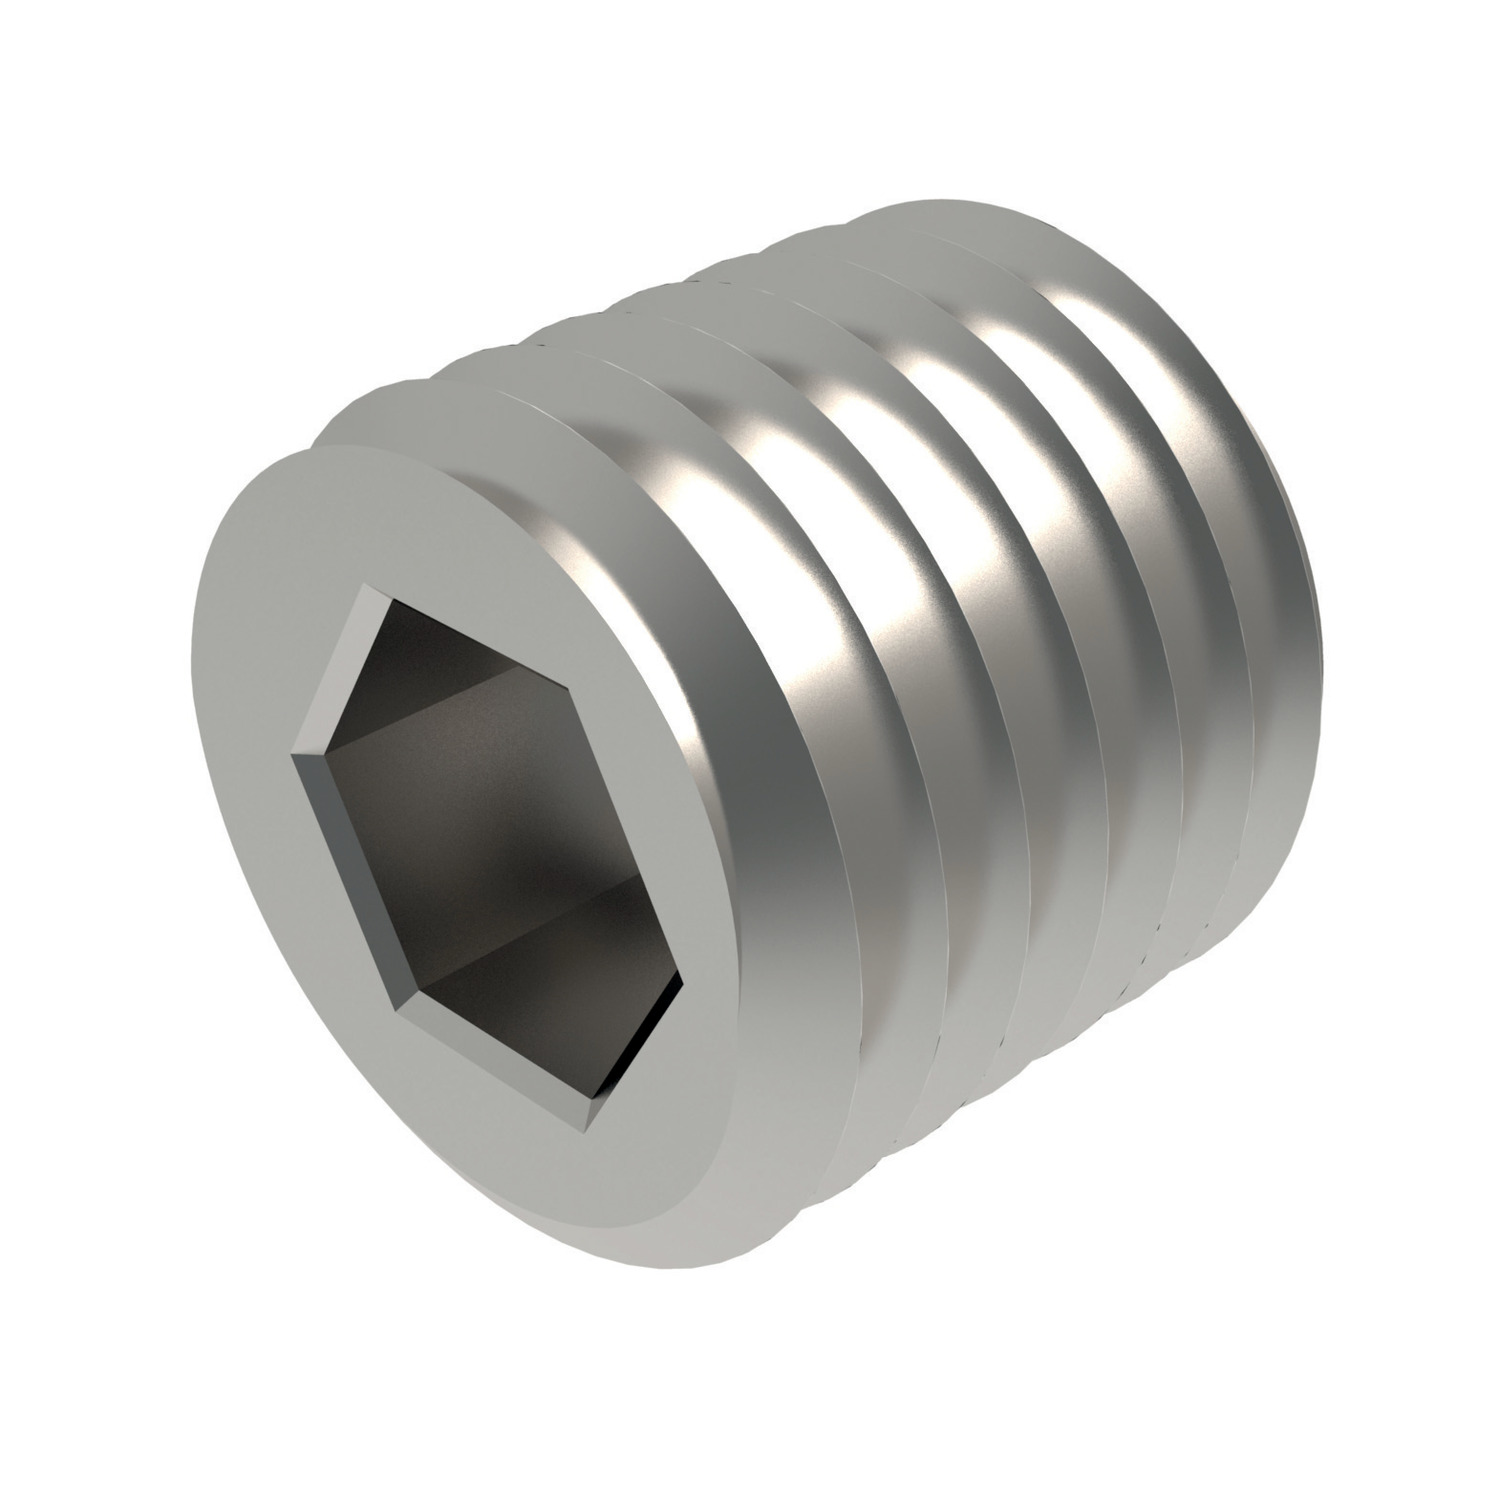 P0199.100-026-A2 Threaded Restrictor M10x1 2.59 orifice A2 stainless steel. DANGER: Ensure this part is installed according to instructions in the product data sheet and installation notes. Holes must be completely free of oil, grease and debris.